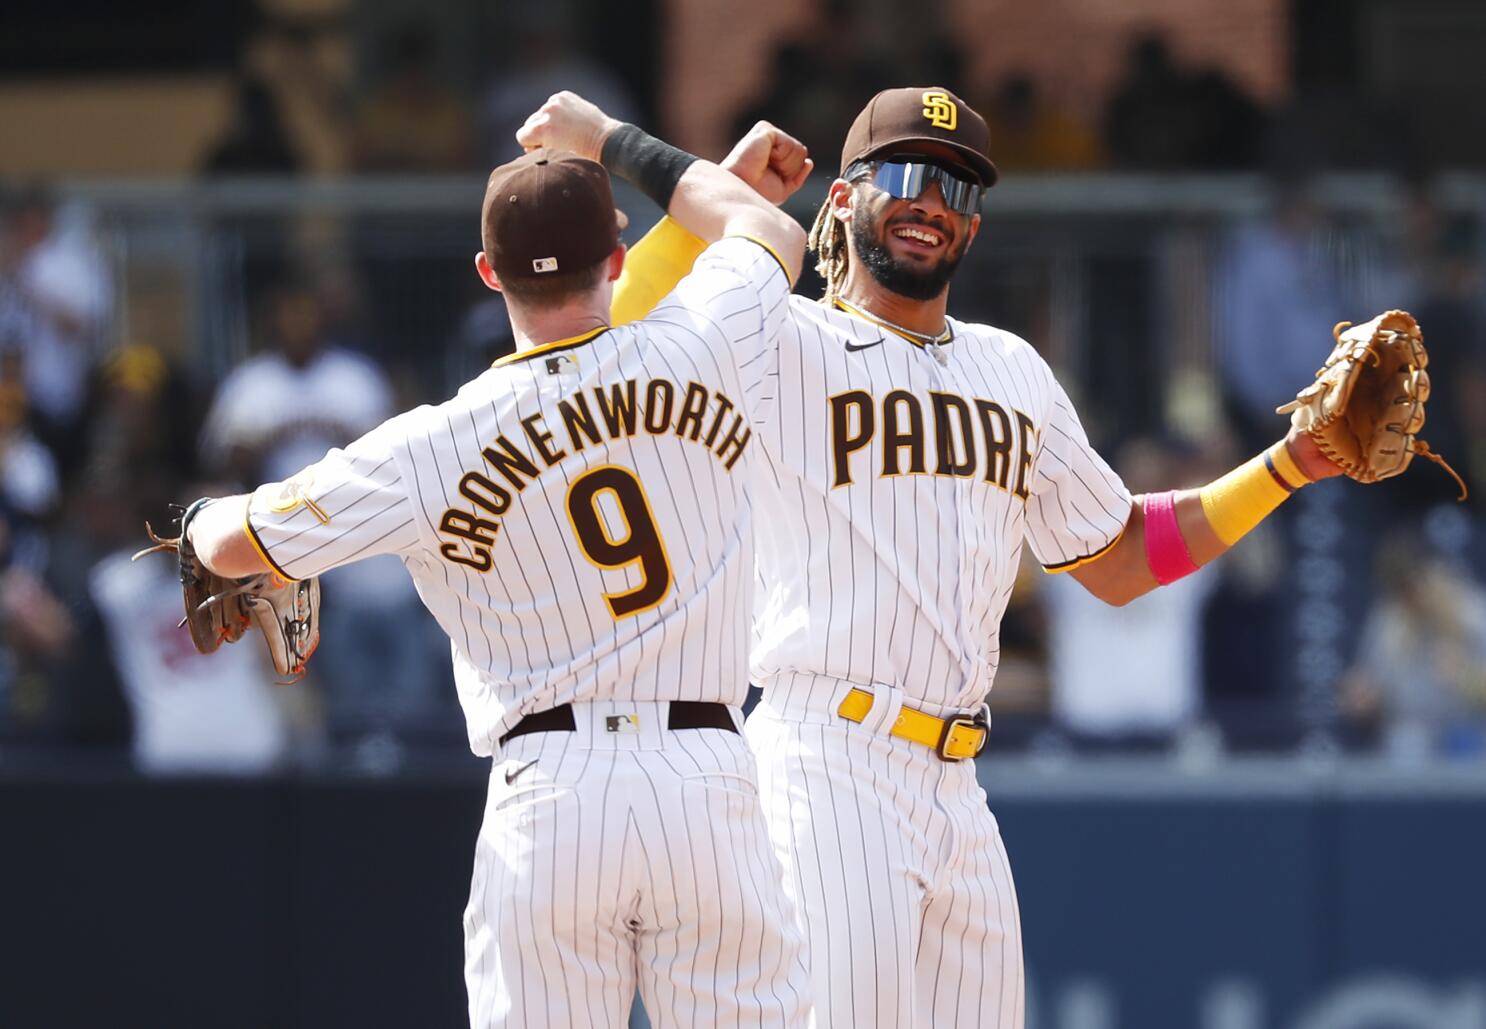 On day Padres celebrate past, Eric Hosmer's walk-off lifts Padres past  Cardinals - The San Diego Union-Tribune